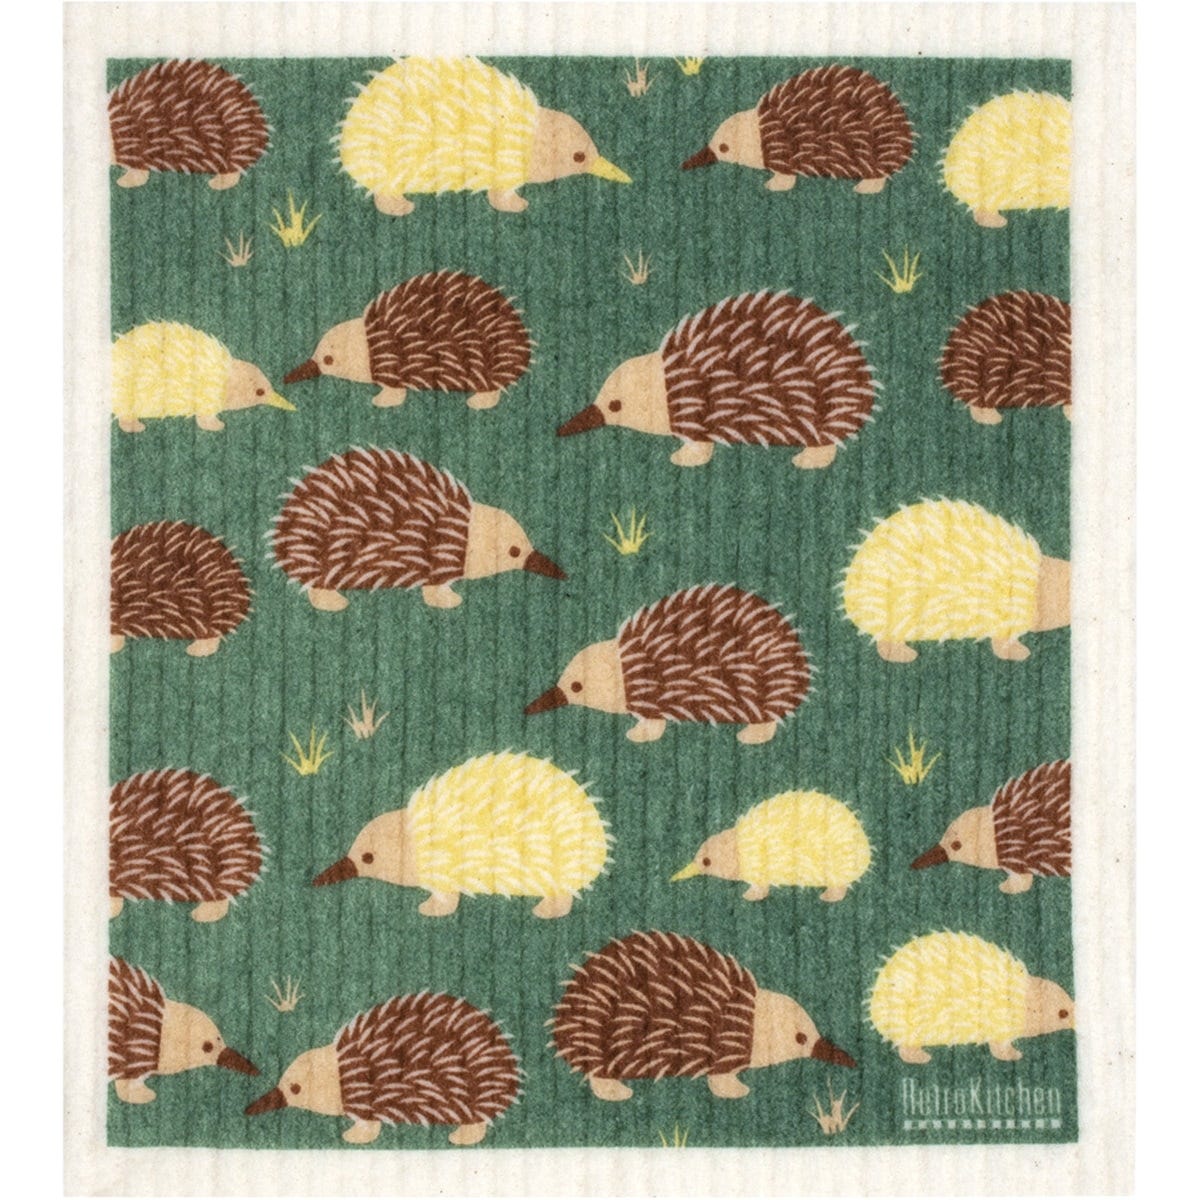 Retrokitchen 100% Compostable Sponge Cloth Echidnas - Dr Earth - Cleaning